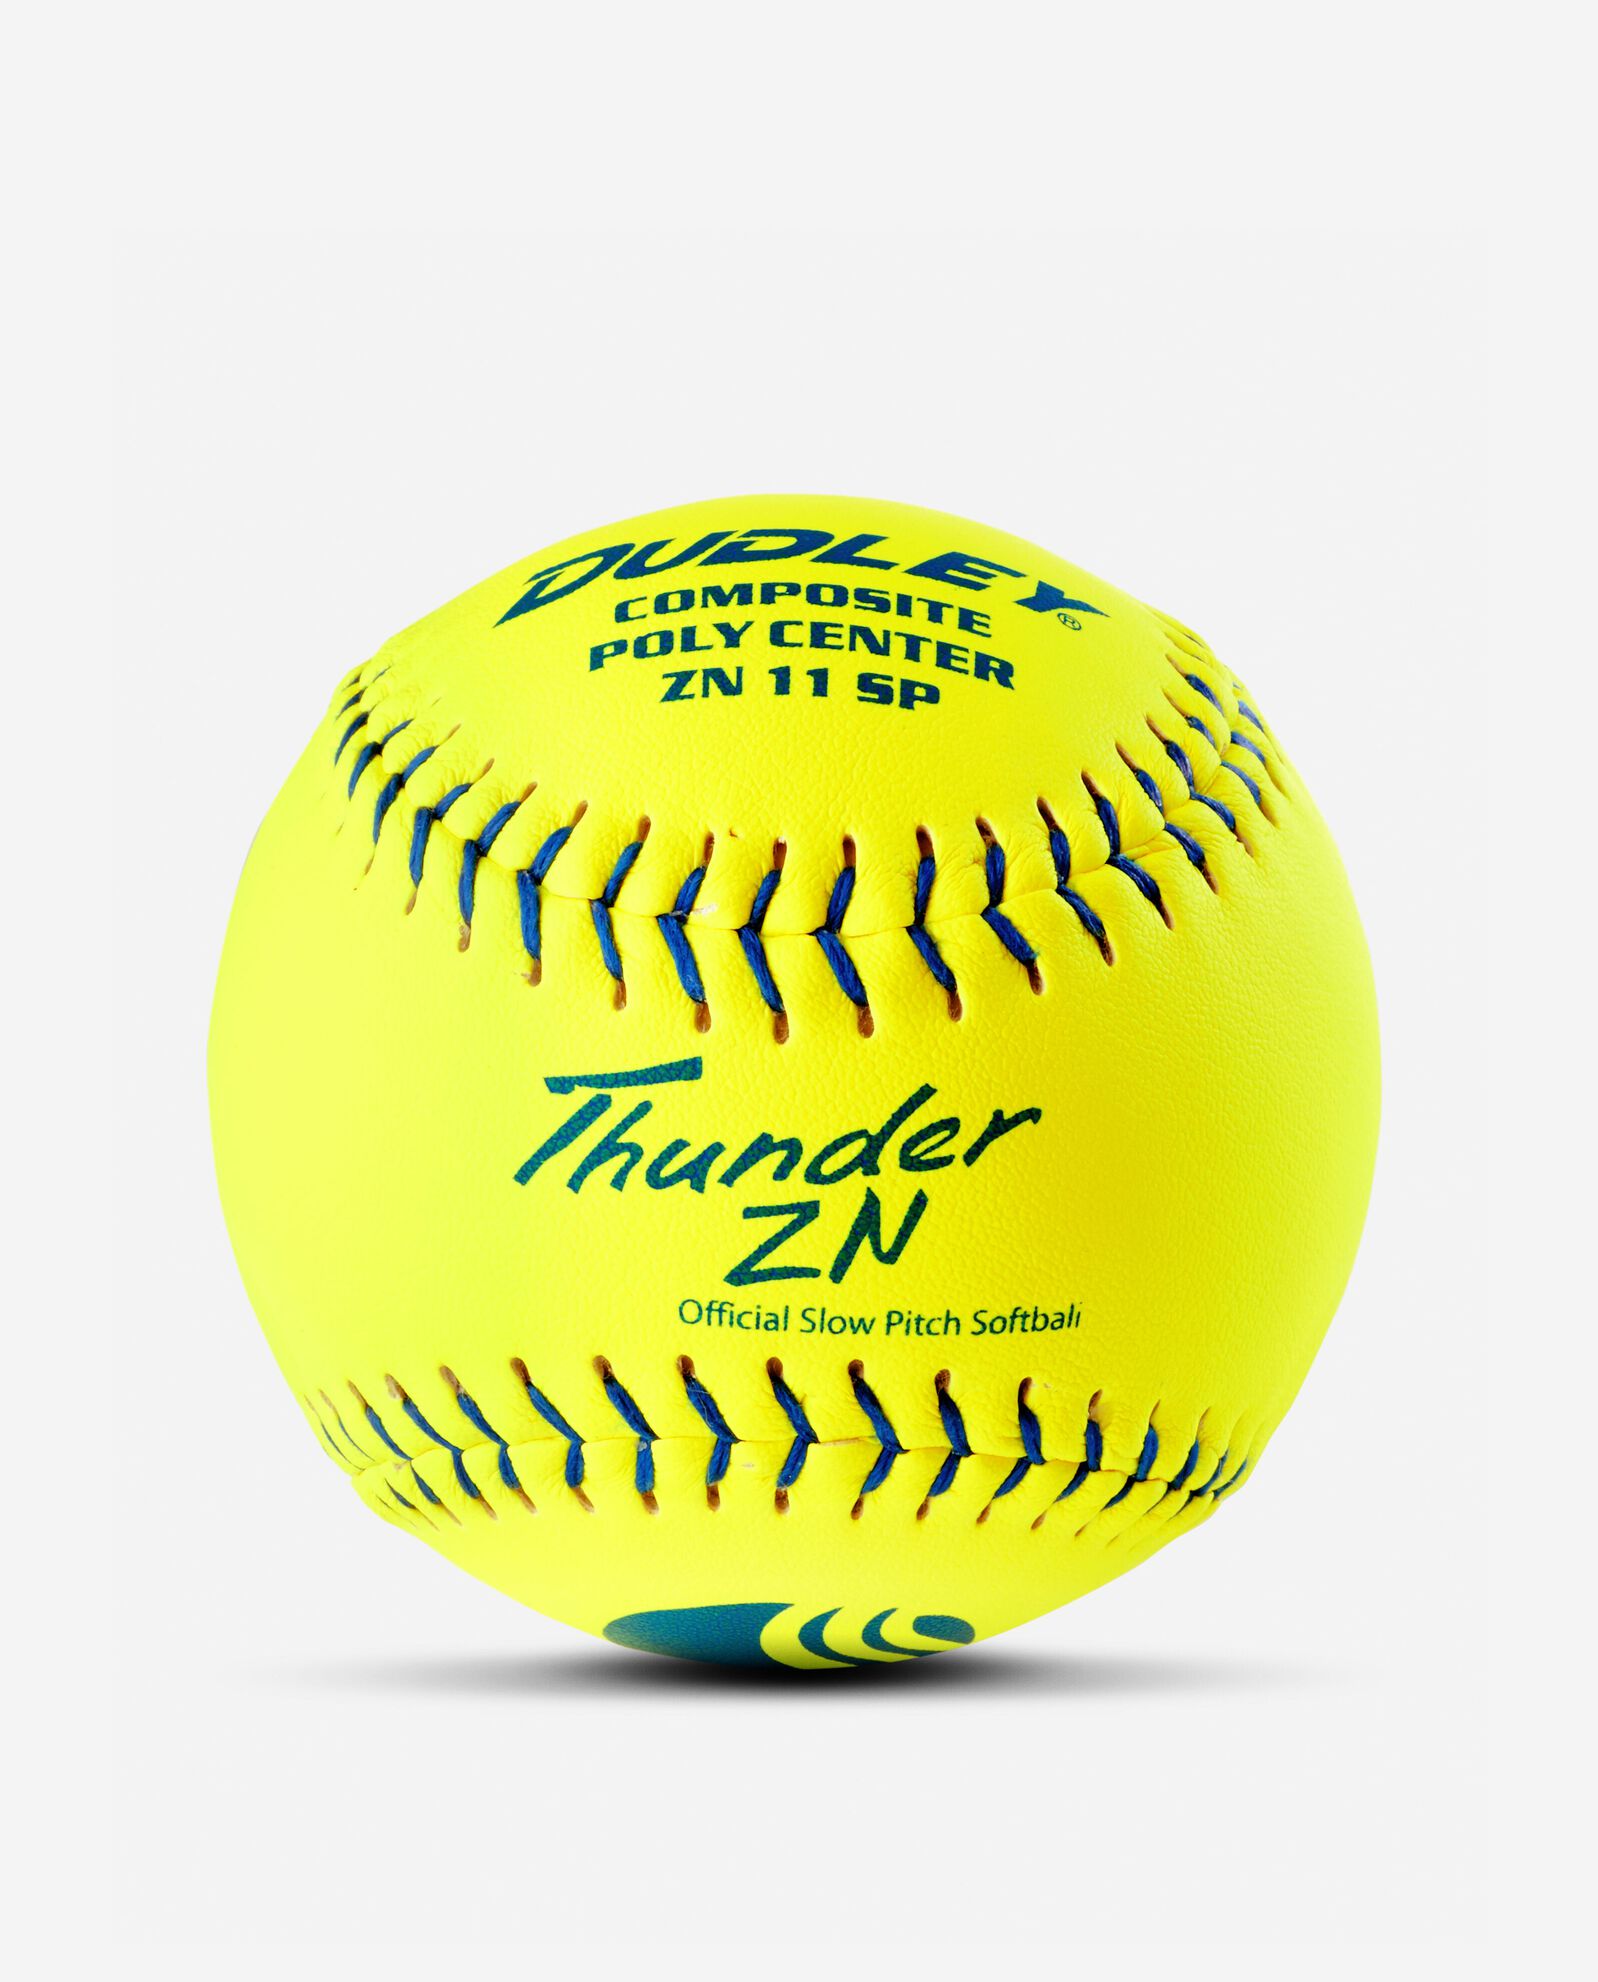 11" USSSA THUNDER ZN CLASSIC-W STAMP SLOWPITCH SOFTBALL - 12 PACK 